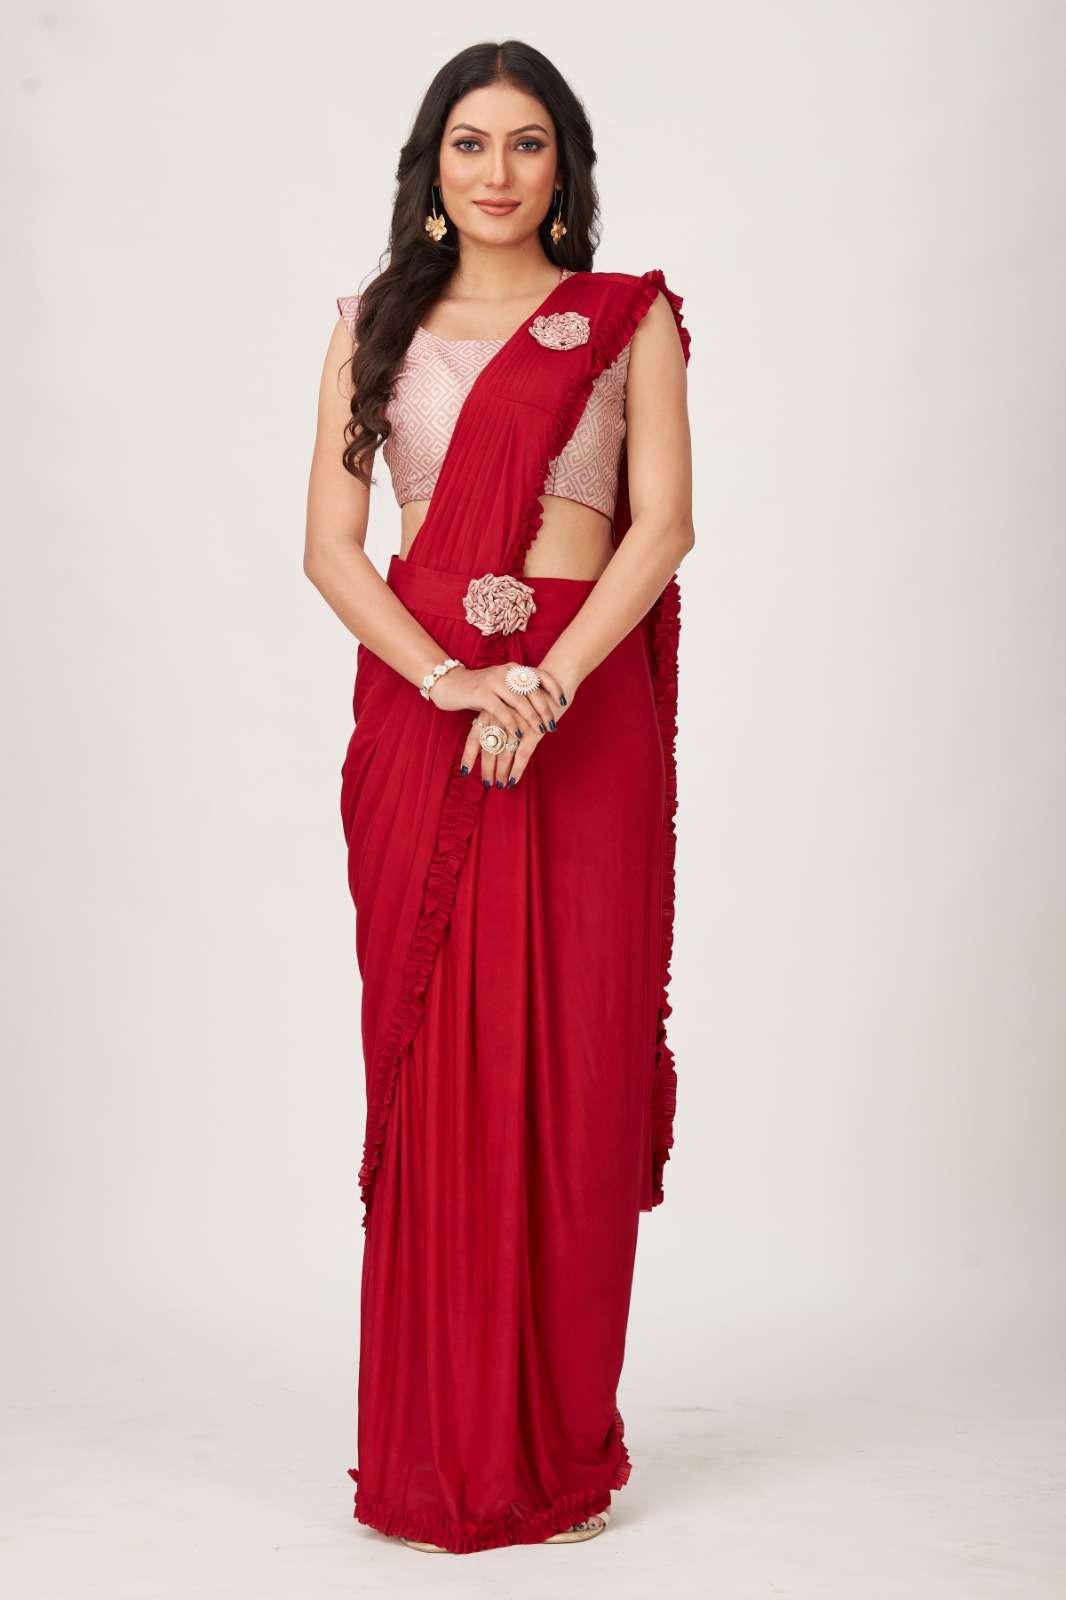 readymade saree design number 101001 ready to wear saree 1minute stylish elegant saree with imported fabric saree with frill border and belt ready to wear saree